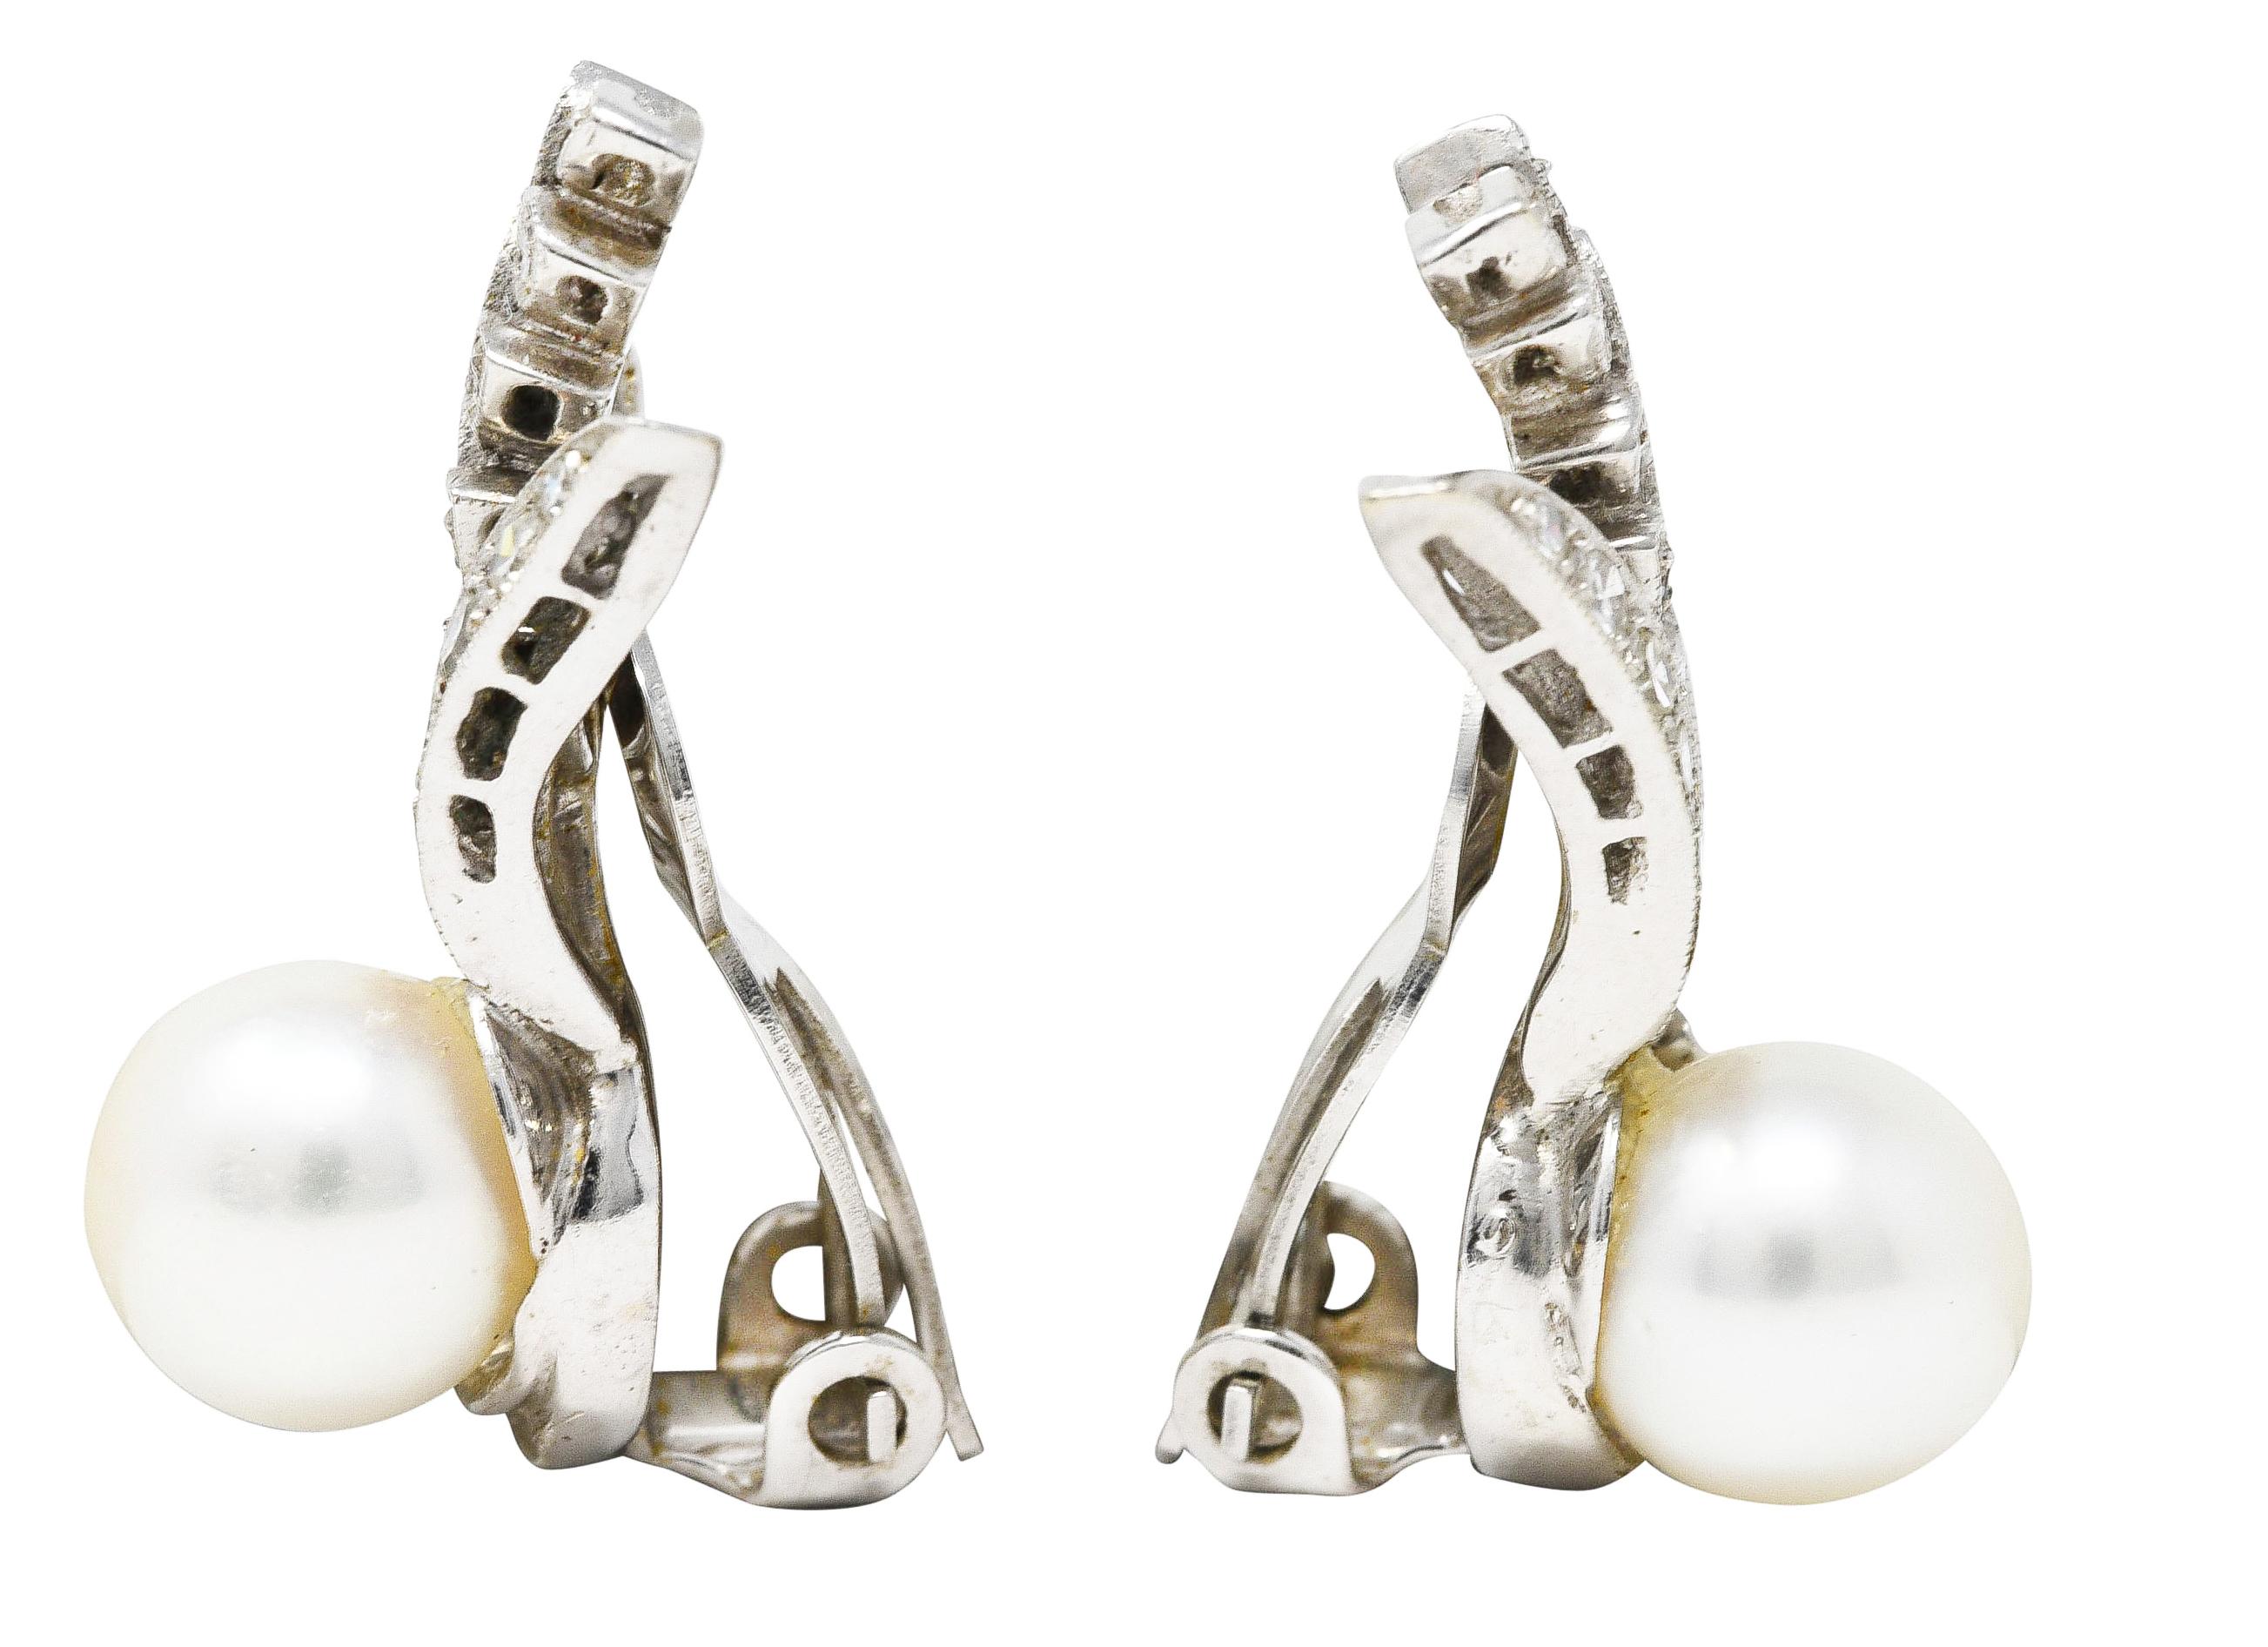 Ear-clip earrings are designed as fanning foliate motif featuring 8.0 mm round pearls. White in body color with good luster. Accented by single cut diamonds pavè set throughout. Weighing approximately 0.76 carat total - H/I in color with VS2